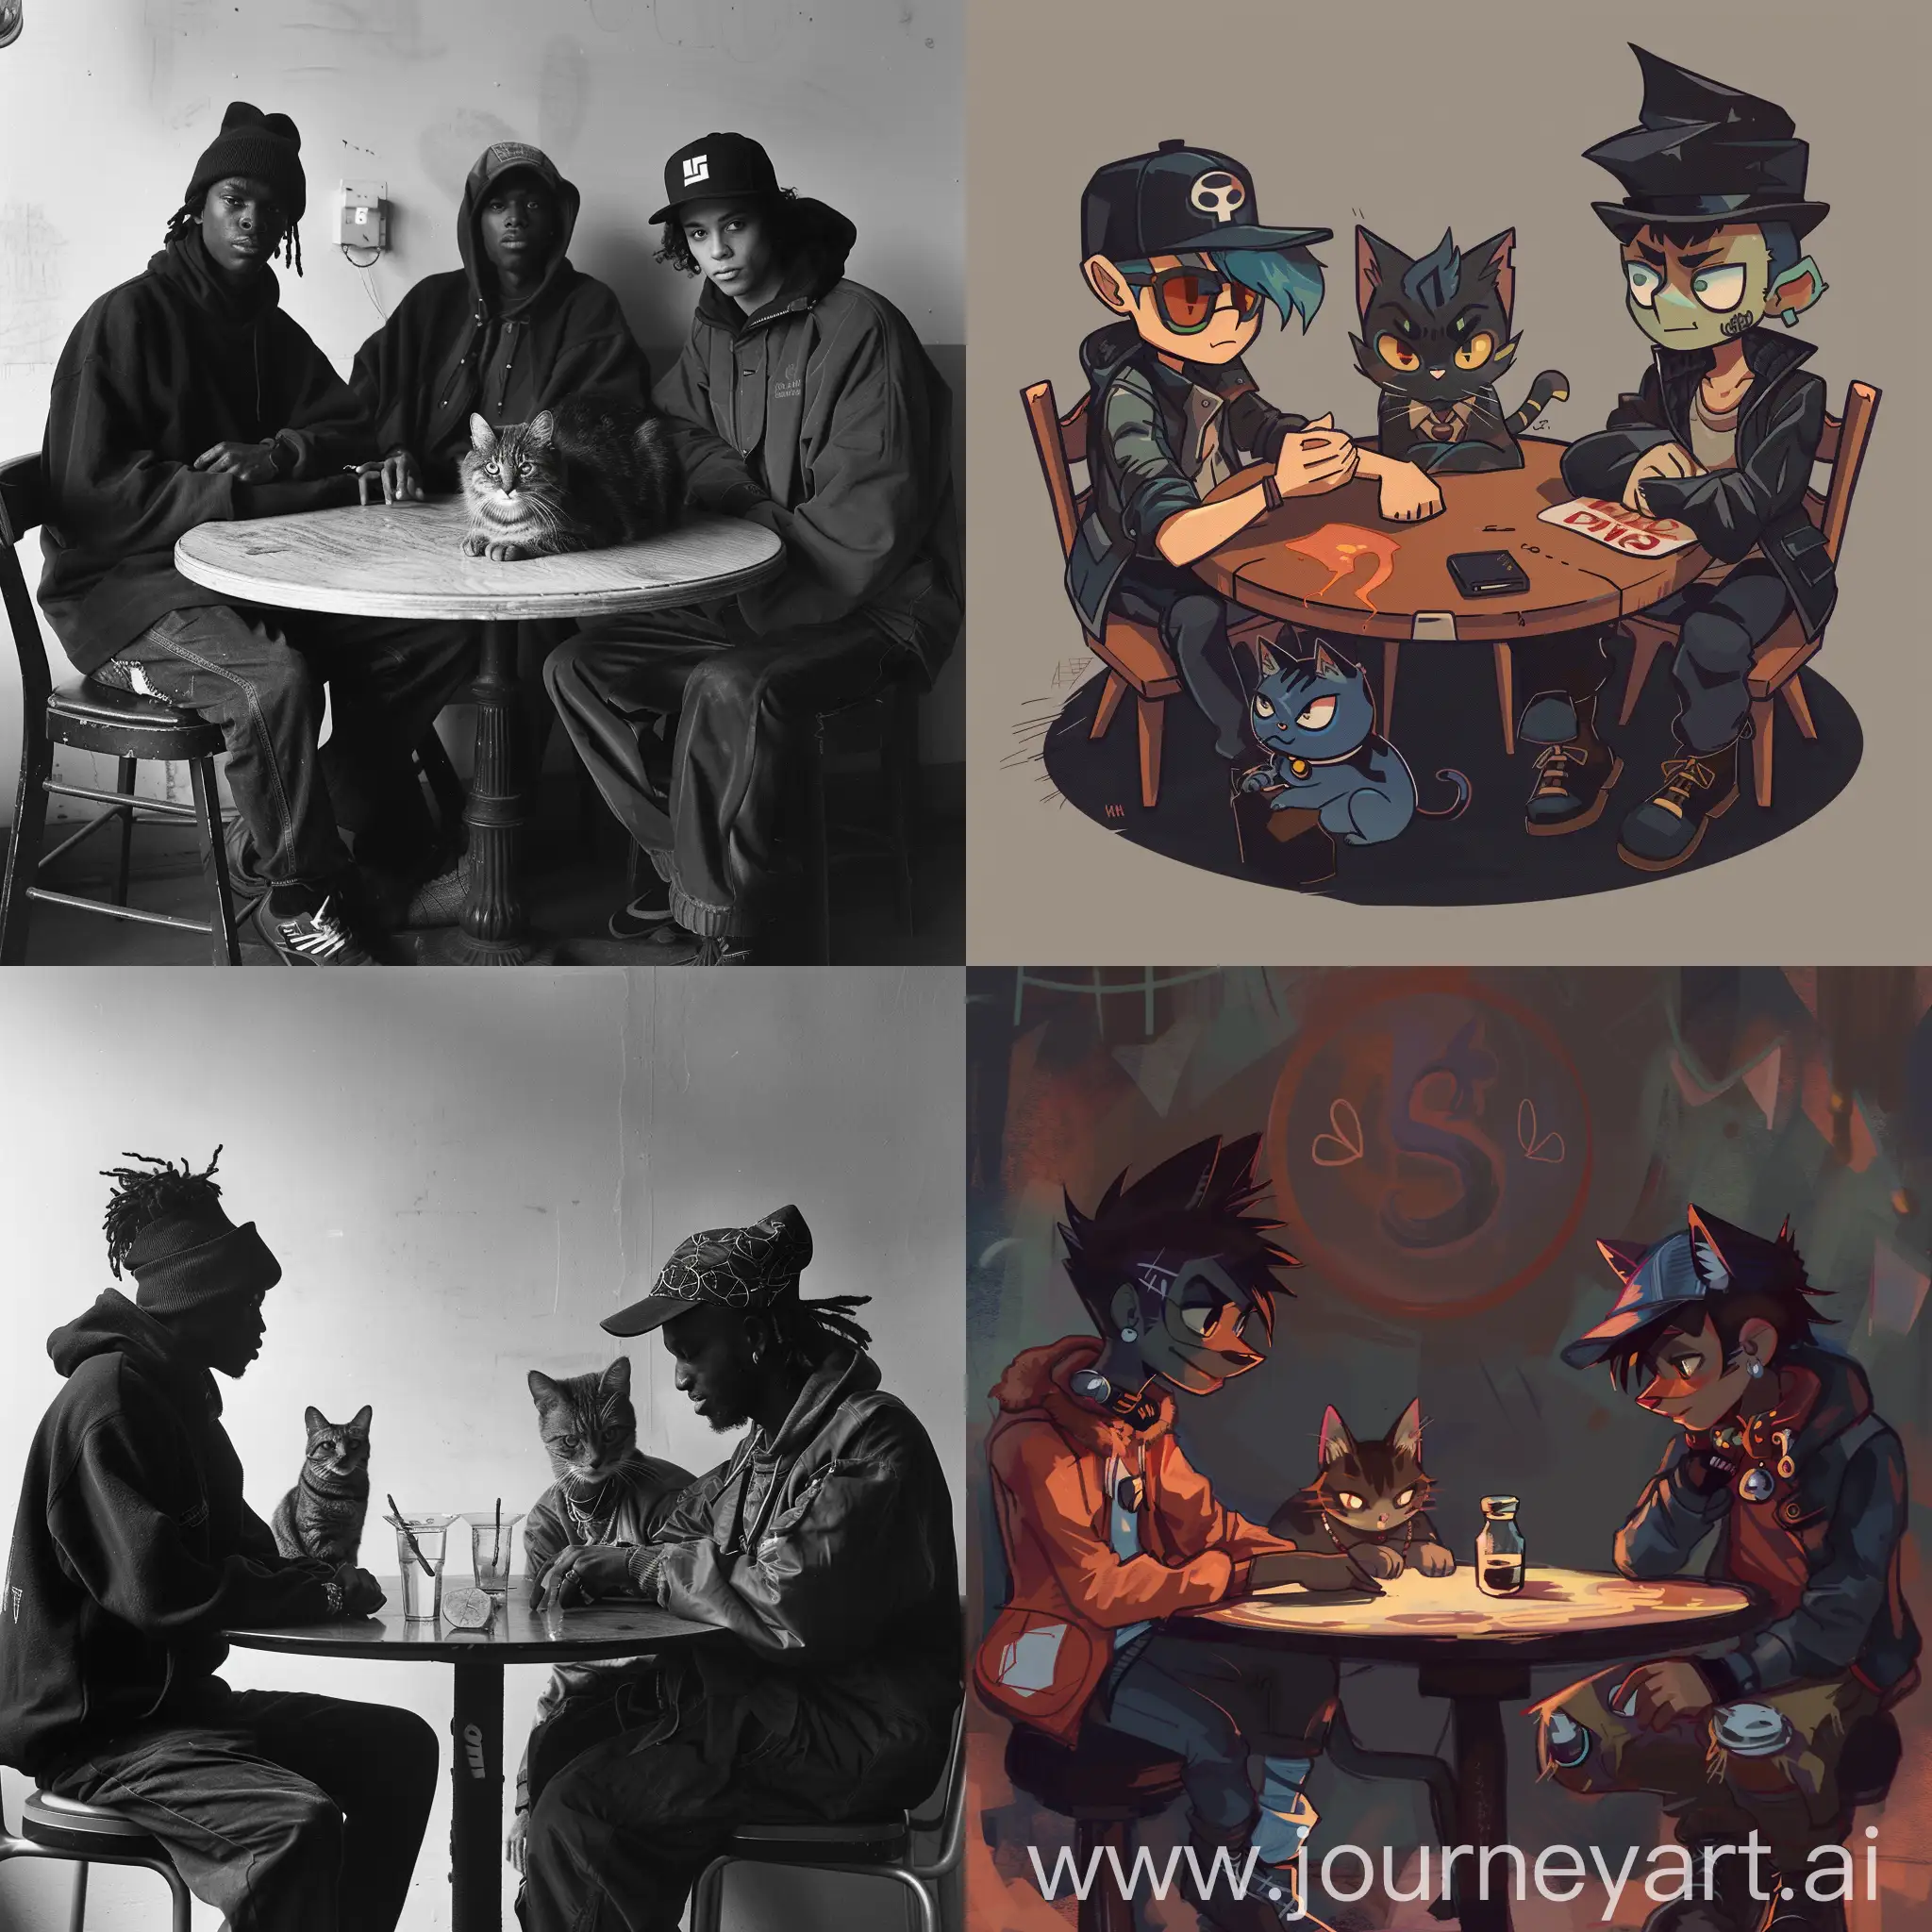 Young-Hustler-and-Cat-Sitting-Around-Circle-Table